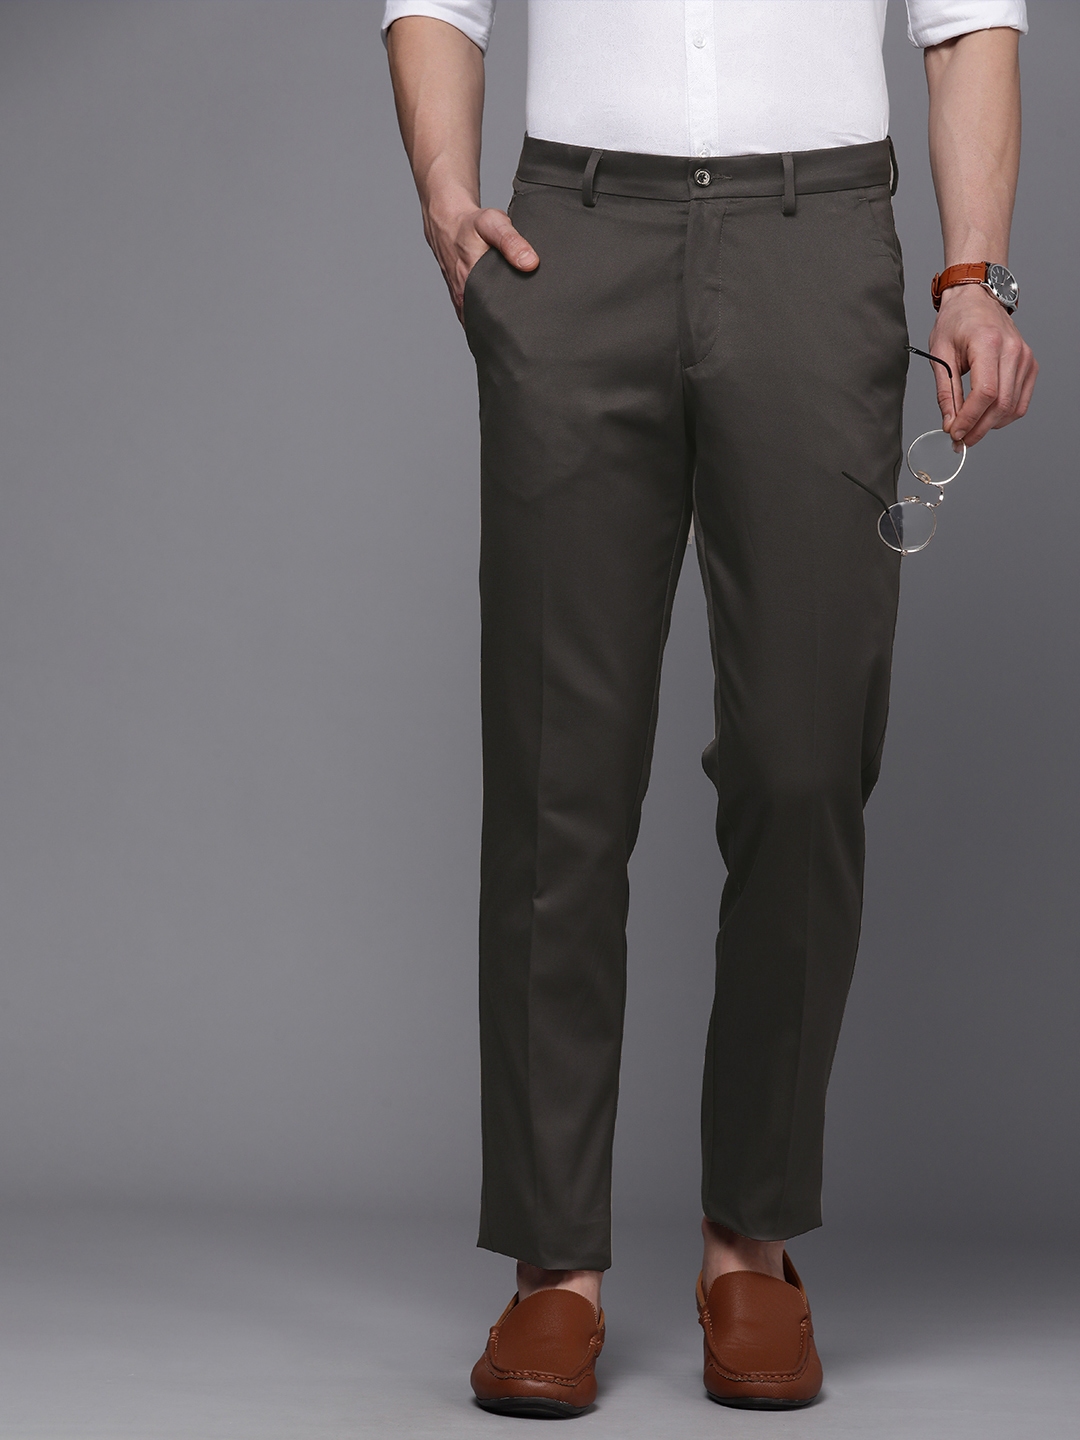 Louis Philippe Formal Trousers : Buy Louis Philippe Grey Checks Trousers  Online